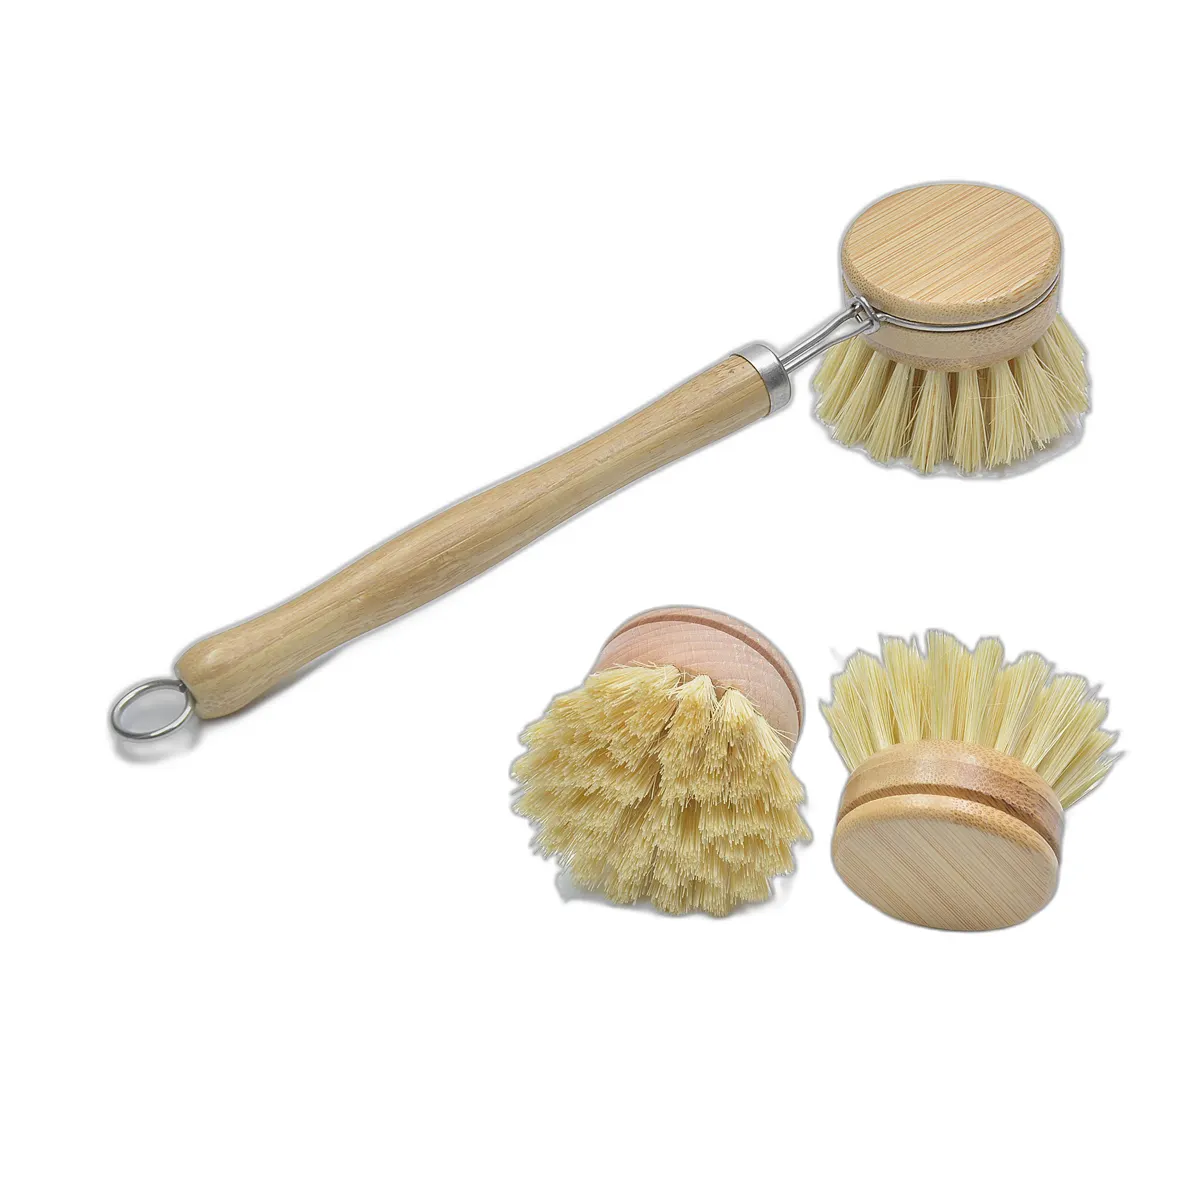 Wooden Dish Brush,Bamboo Wood & Natural Bristle Tampico Fiber Cleaning Brushes,Includes 2pcs Replacement Brush Heads for Grill B